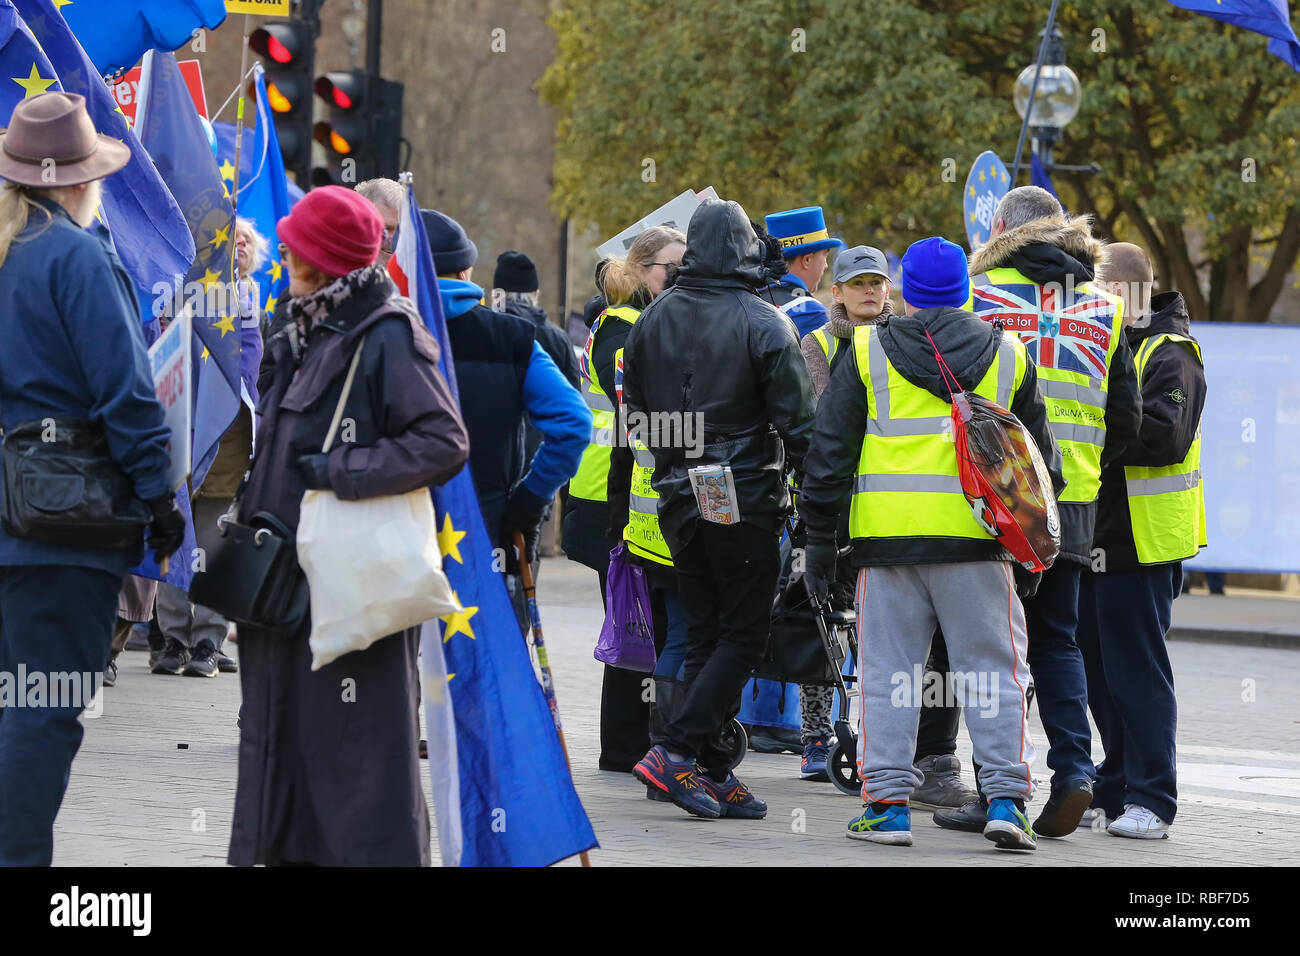 Yellow vest protesters are seen outside House of Parliament during the protest. Pro and anti- Brexit demonstrators gather outside the Houses of Parliament as the Meaningful Vote debate begins in Houses of Commons, at the end of the five day debate the MPs will vote on Prime Minister, Theresa May's Brexit deal. Stock Photo